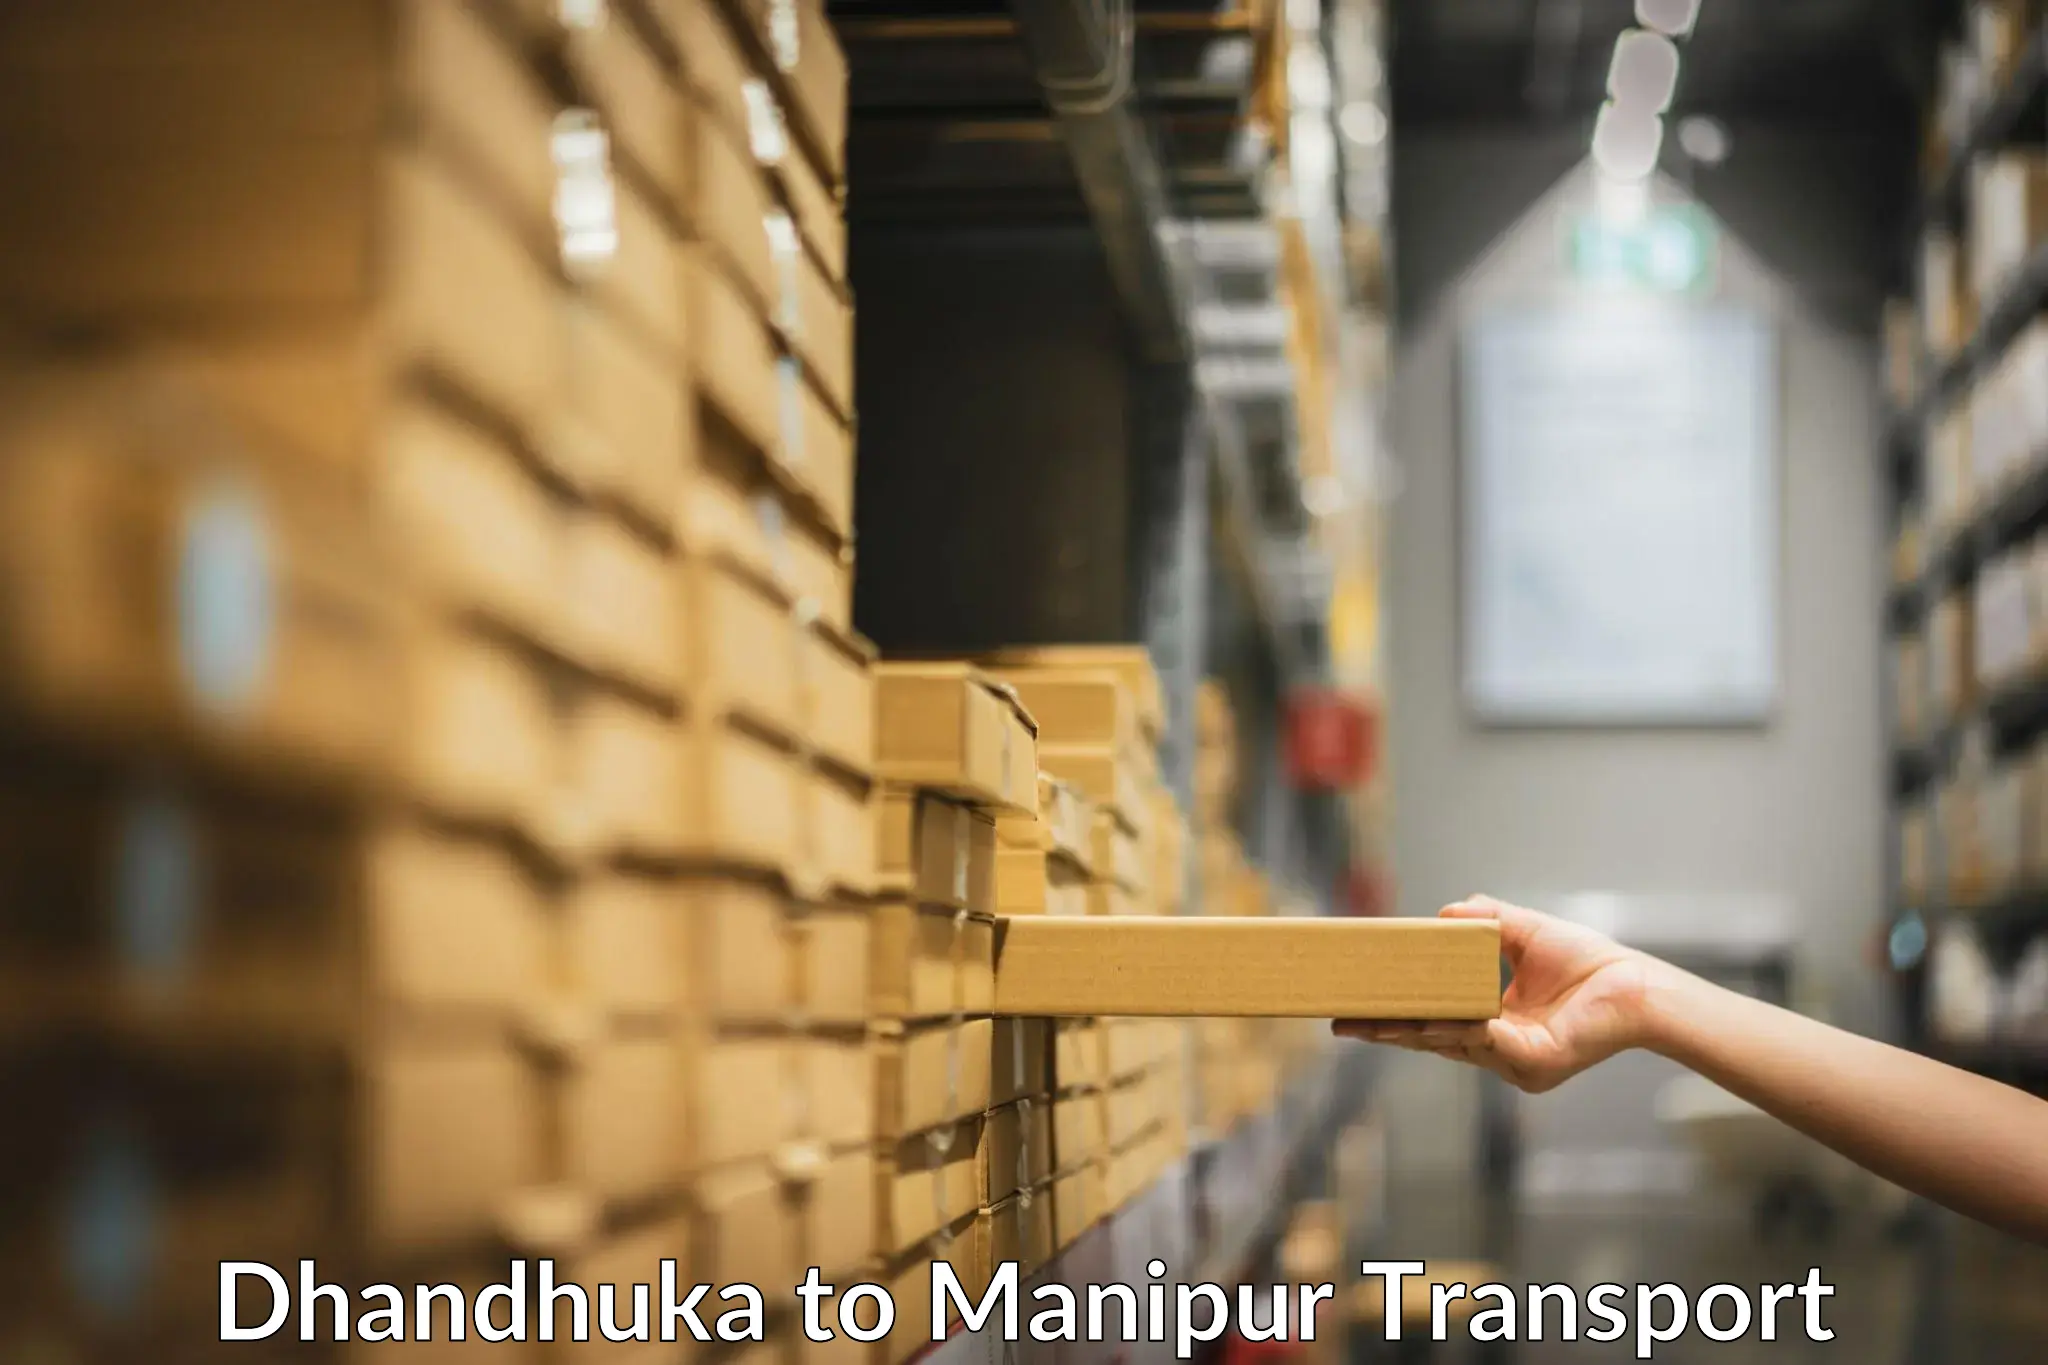 Nearby transport service Dhandhuka to Manipur